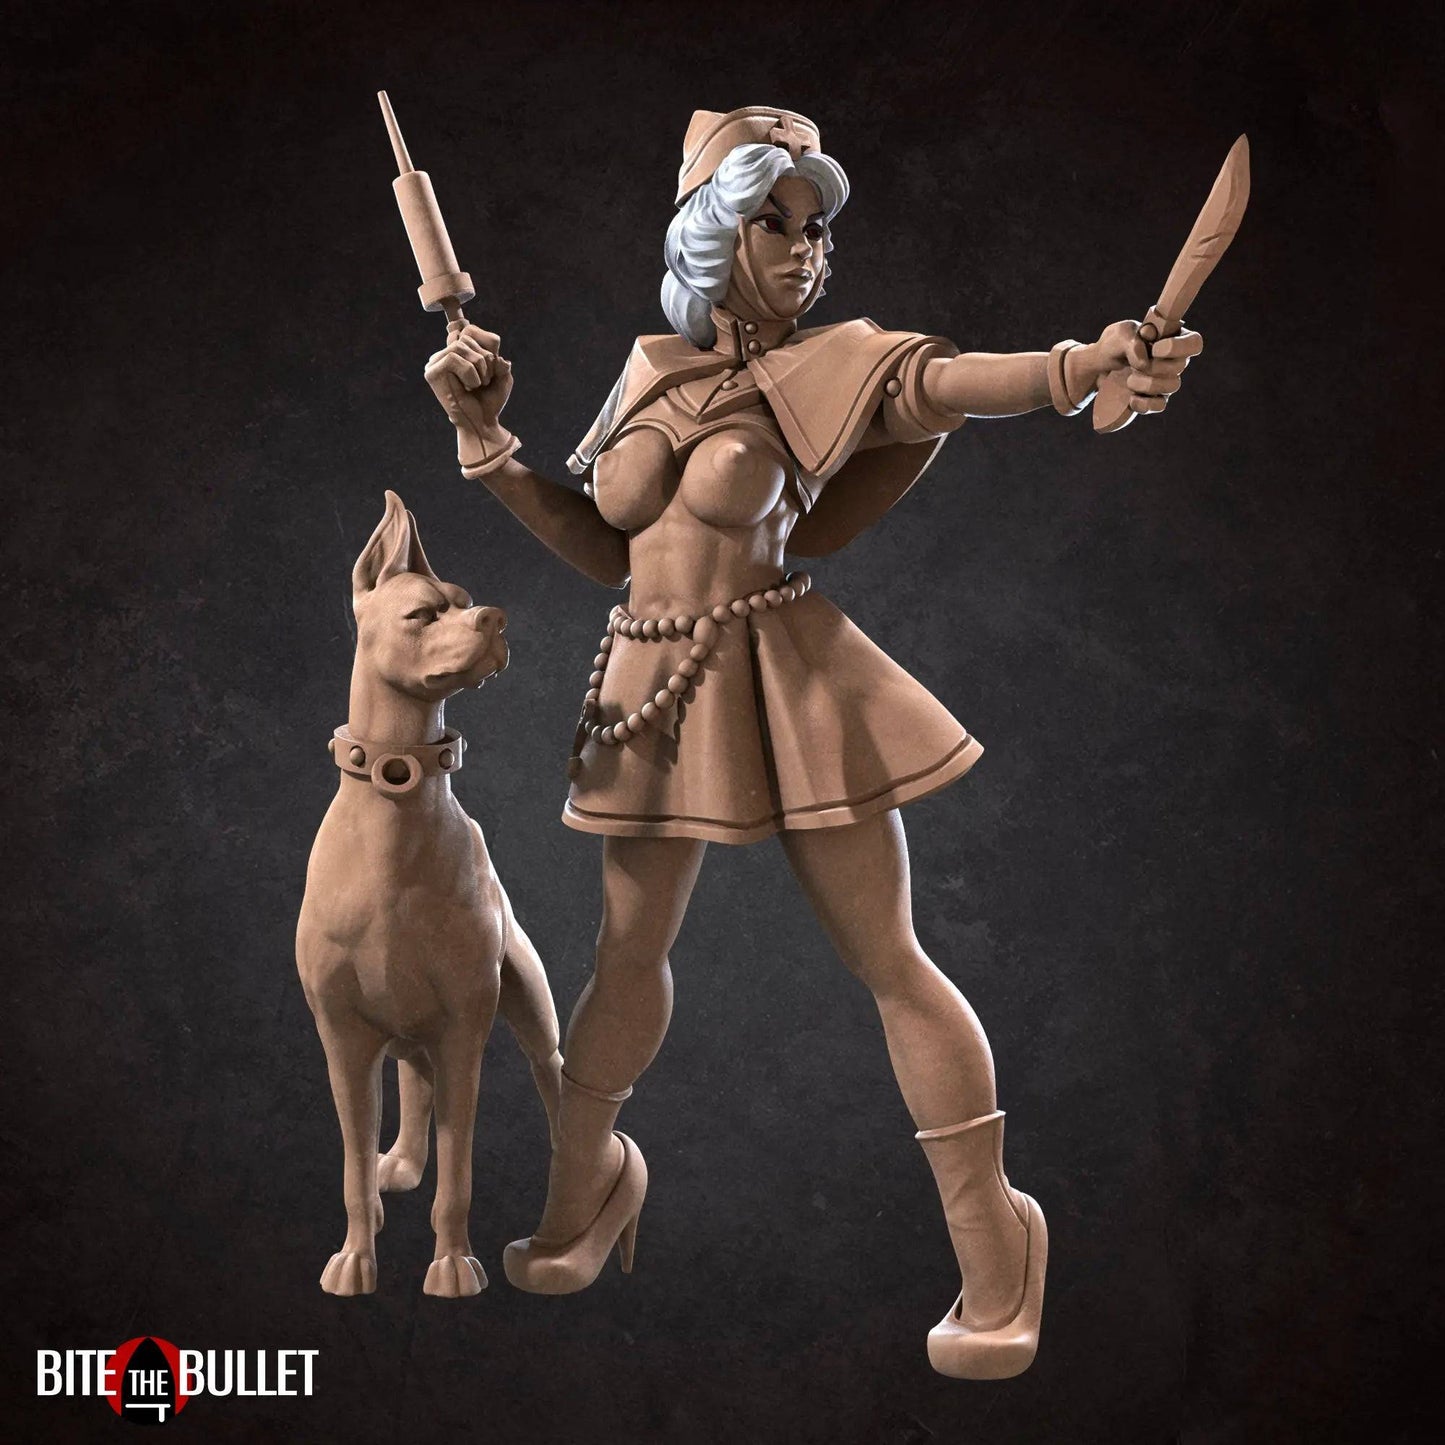 Emilia, Pinup SFW NSFW Lovely Woman, Wartime Nurse and Pup | D&D Miniature Pinup | Bite the Bullet - Tattles Told 3D